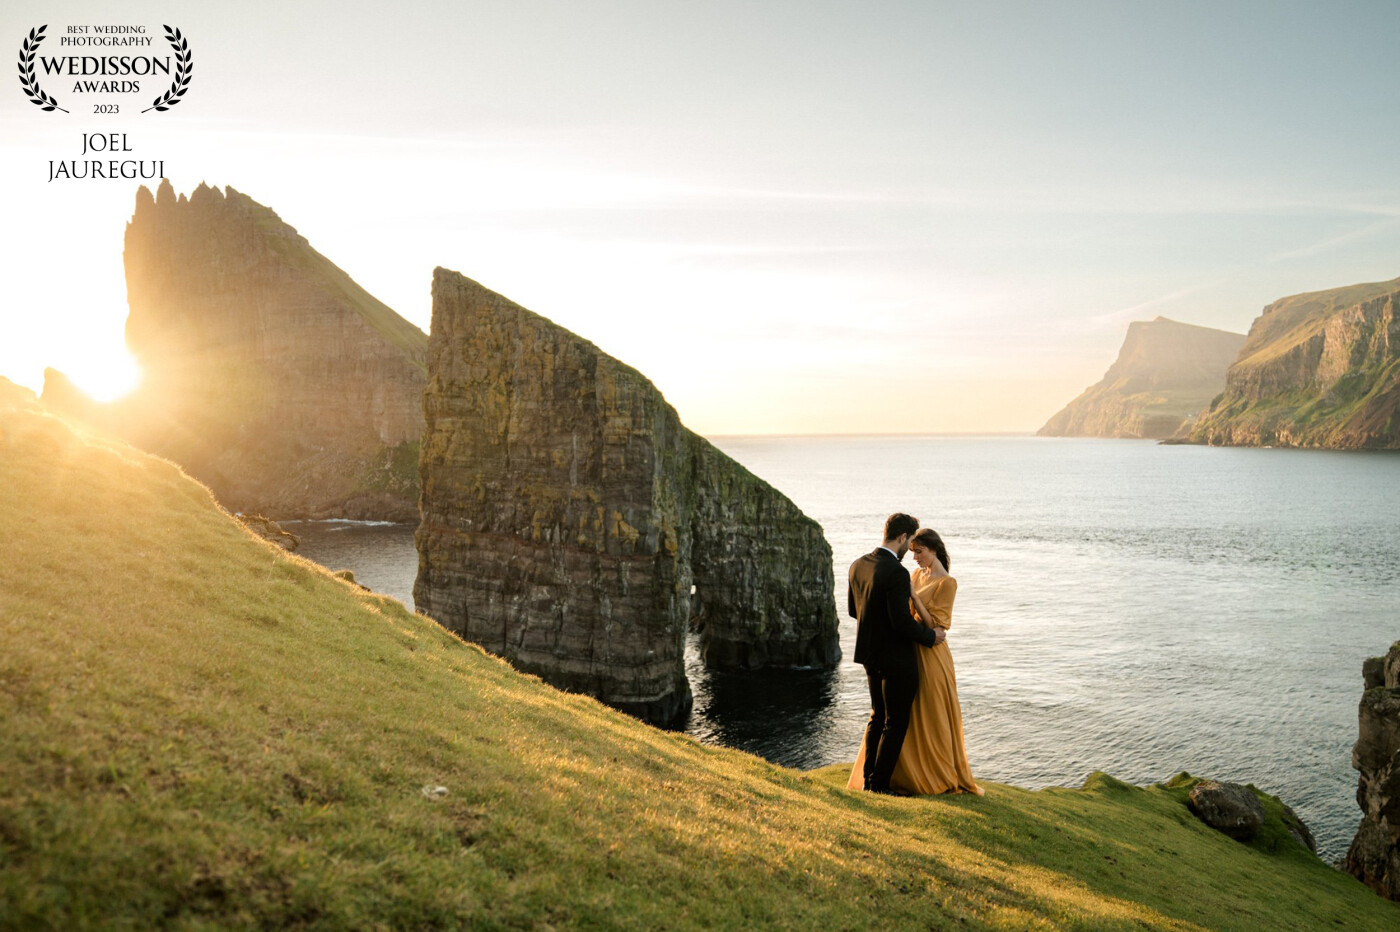 This was my first time in the Faroe Islands. Alahna and Victor came from London for this adventure elopement. There are two ways to get to this location, one is by hiking a long, long way, and the other way is by chartering a boat. We went with the latter. On the first day and first attempt, the water was too rough for the boat to dock at the drop-off safely, so we were forced to turn around. On day two, the attempt was a success, but then we had one heck of a hike to get to this vantage point, and the sun was setting quickly, so we had to move. All in all, I think it was a success. Special thanks to my friend Tyler; his knowledge and planning made this possible.